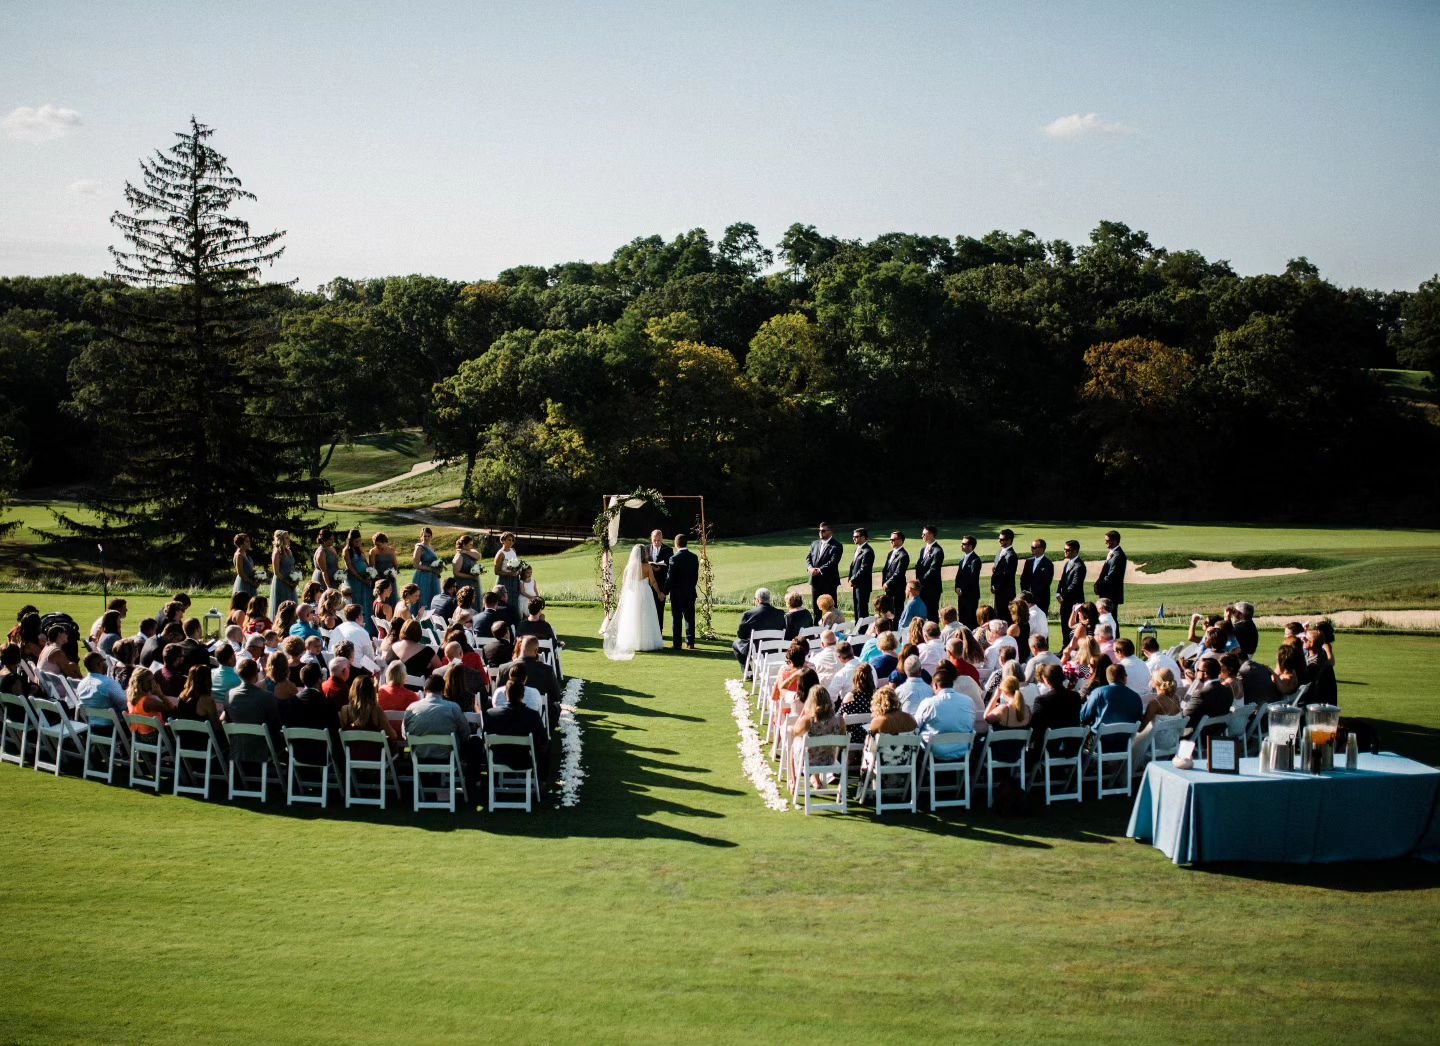 Whose ready for Summer?  Outdoor wedding ceremonies are fast approaching and I wanted to quickly remind you of a few planning tips

1) Make sure your chairs are arranged so all the guests can see the wedding party.  Straight rows are easier, but view